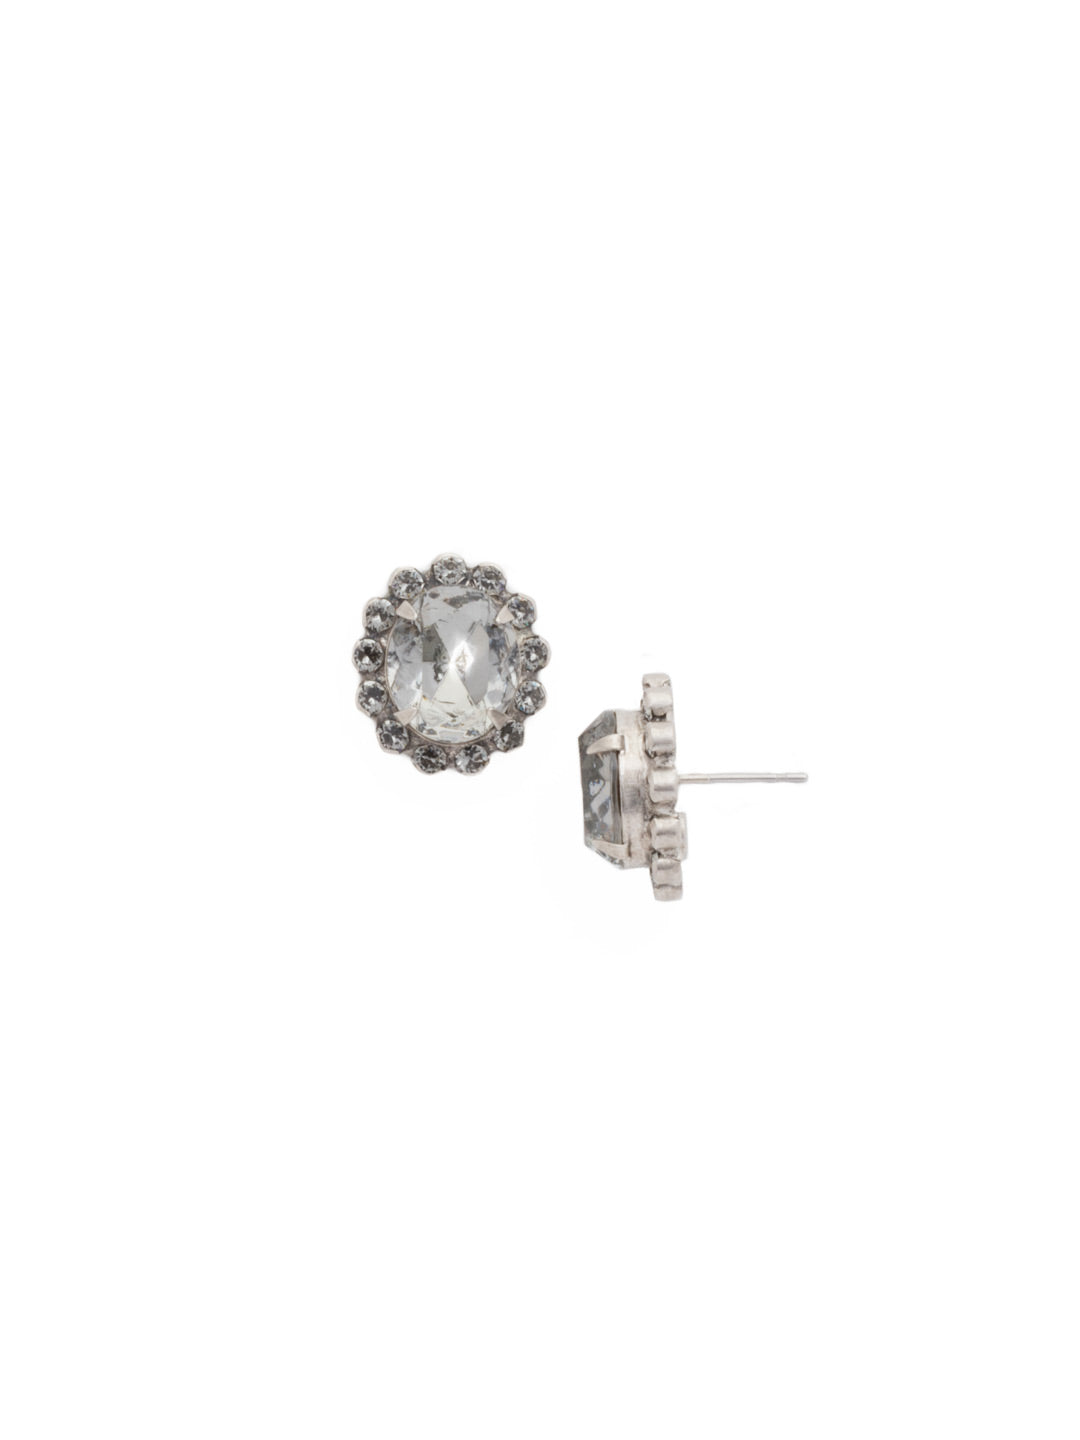 Graycen Round Stud Earring - ECY5ASCRO - The Graycen Round Stud Earrings feature a round halo cut crystal on a post. From Sorrelli's Crystal Rock collection in our Antique Silver-tone finish.